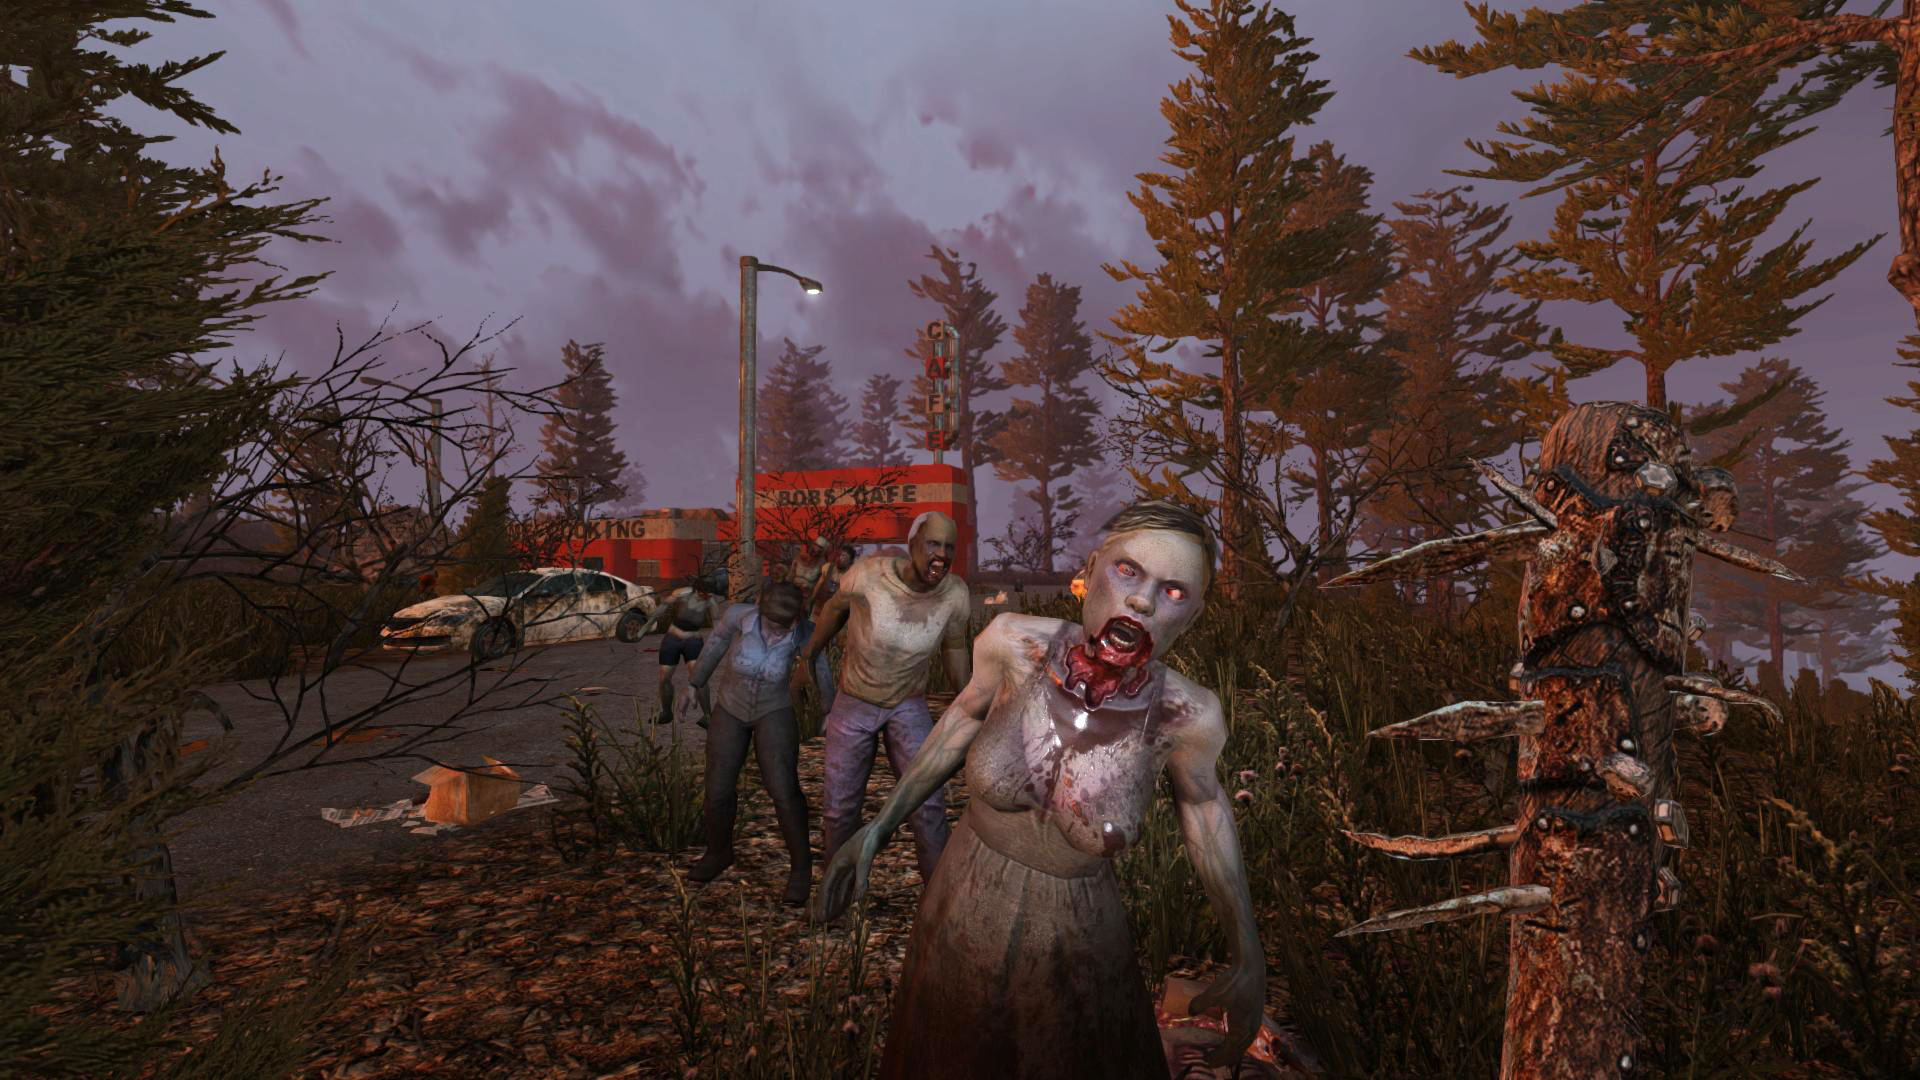 Almost 12 years after release, 7 Days to Die finally announces it’s leaving early access